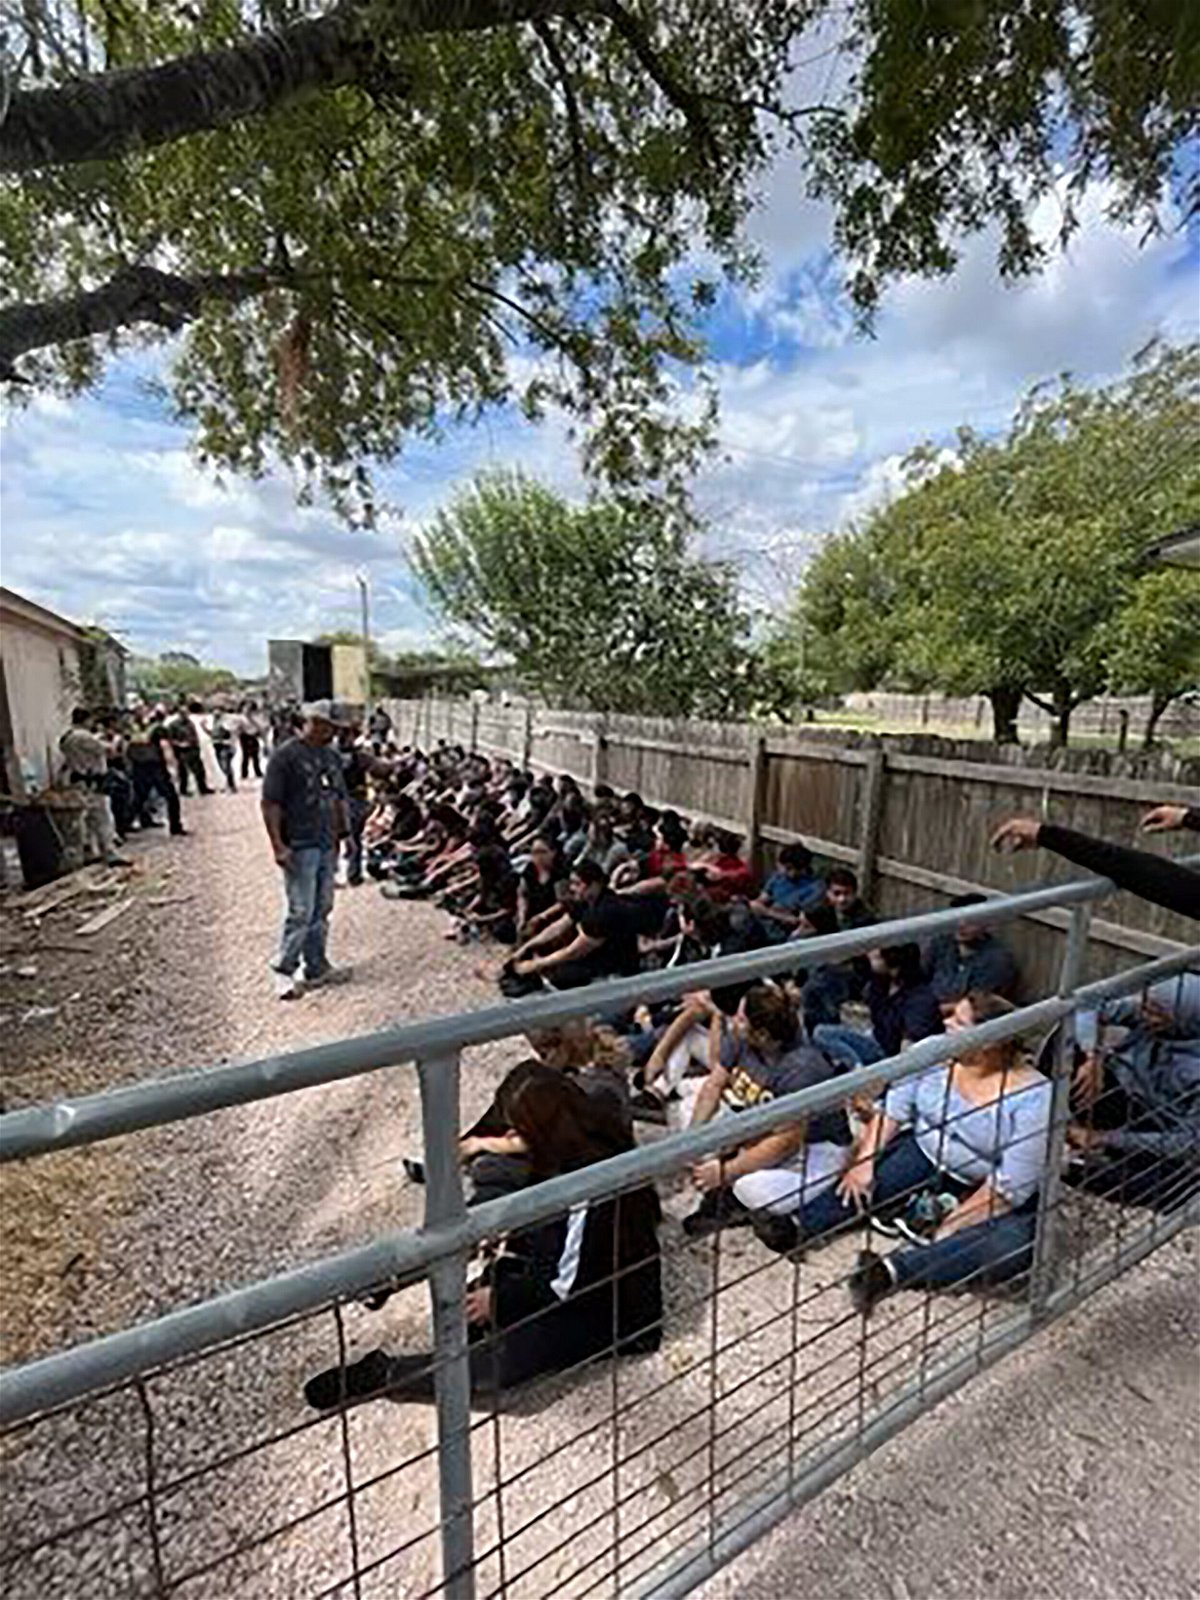 84 Undocumented Immigrants Rescued from Semi-truck in Southern Texas